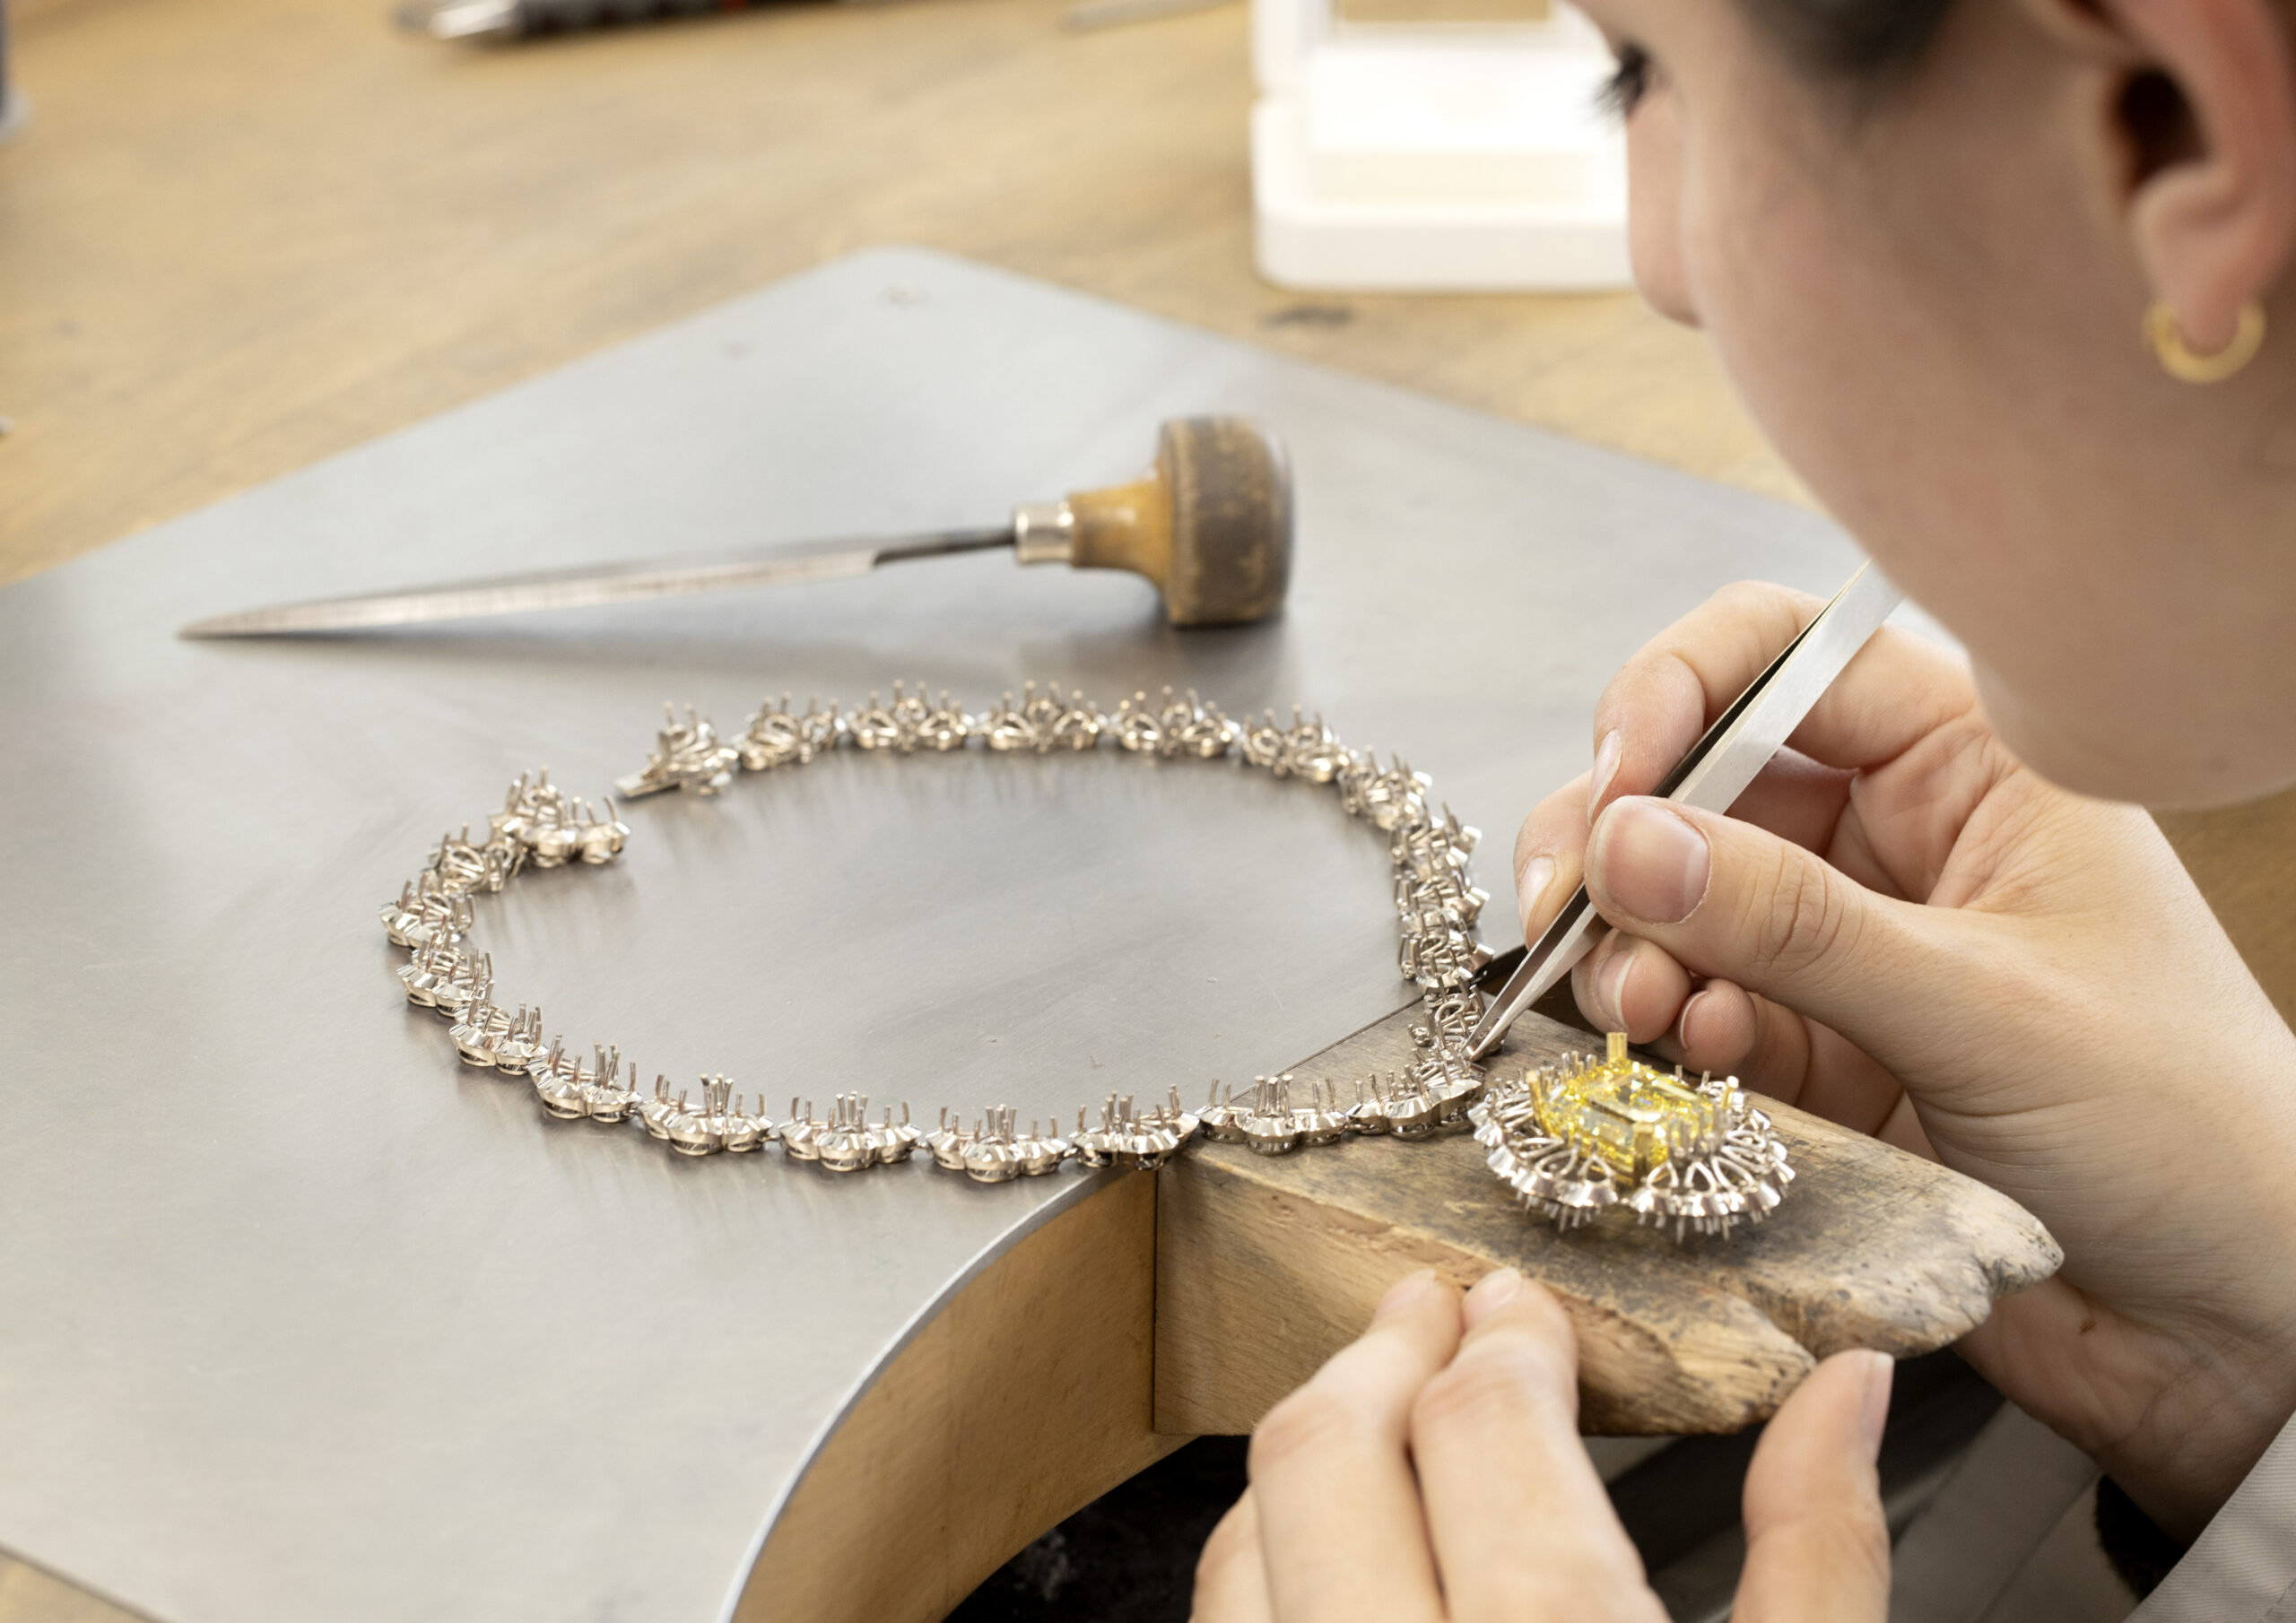 Brilliant Earth unveils nature-inspired jewelry collection